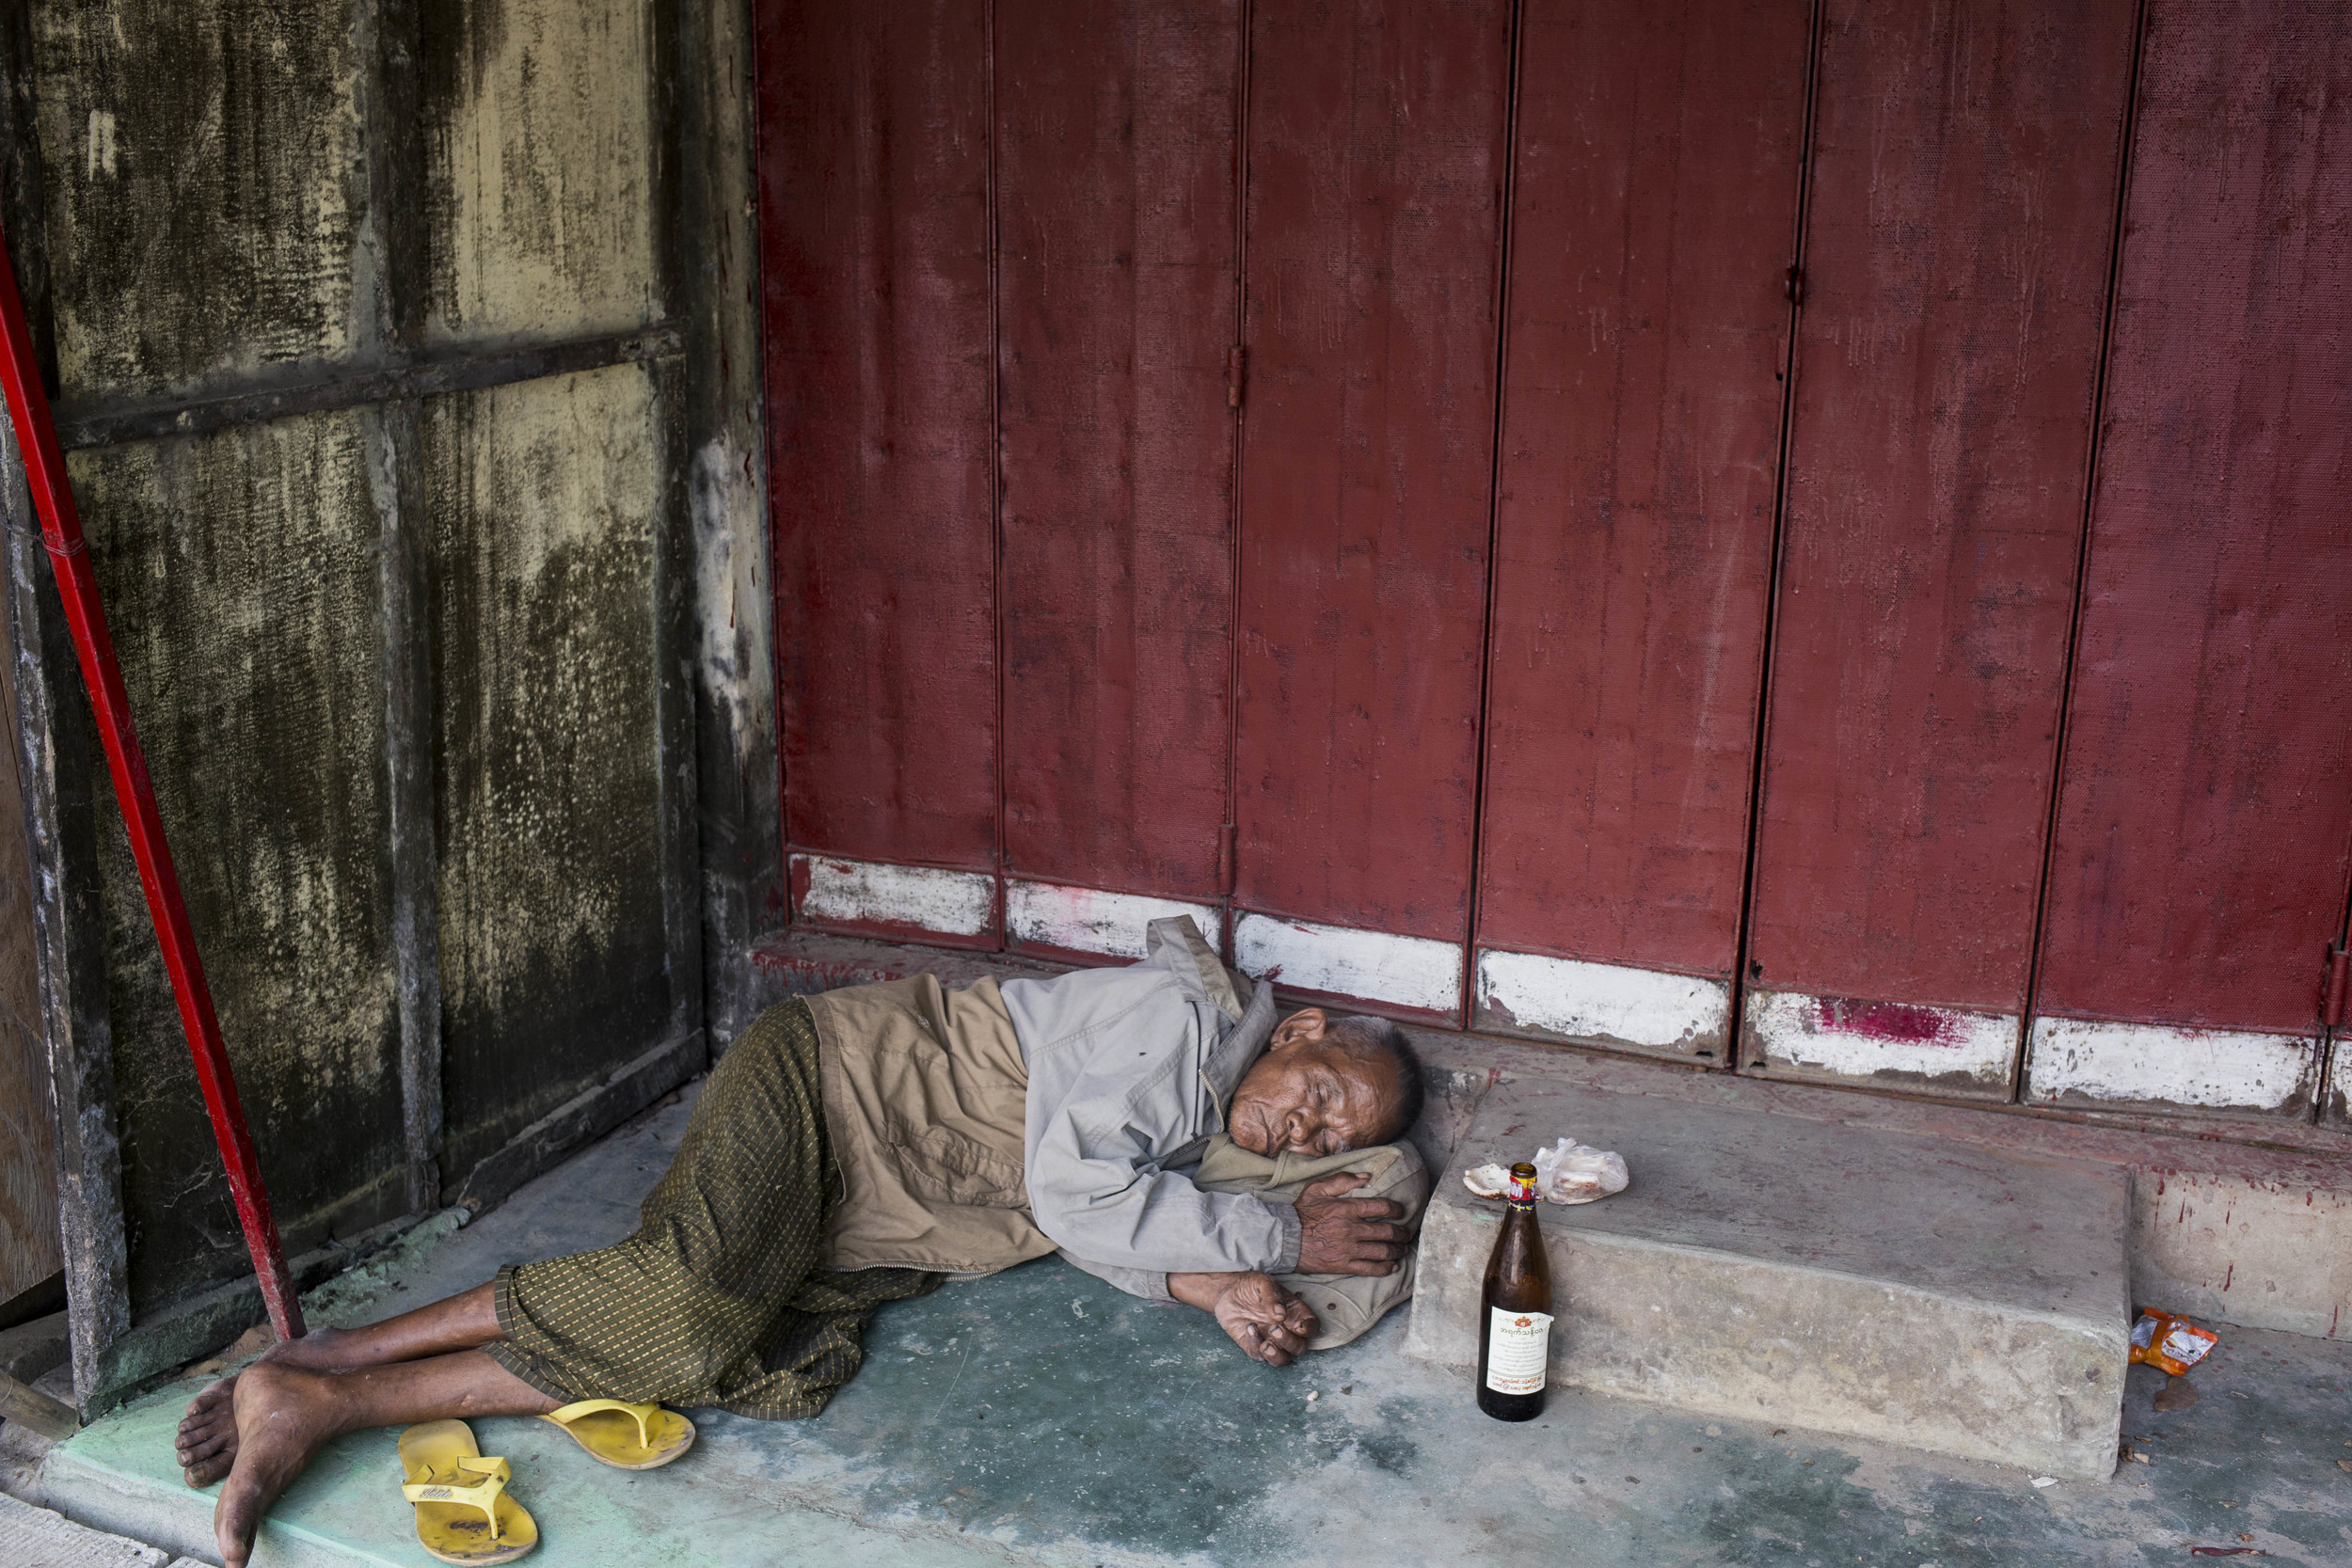  A drunk man is seen in downtown Yangon. The bottle in front of him is rice wine from Myanmar, which contents 40% alcohol and can be purchased under 1000 kyet (1 usd). Photo by Ann Wang 